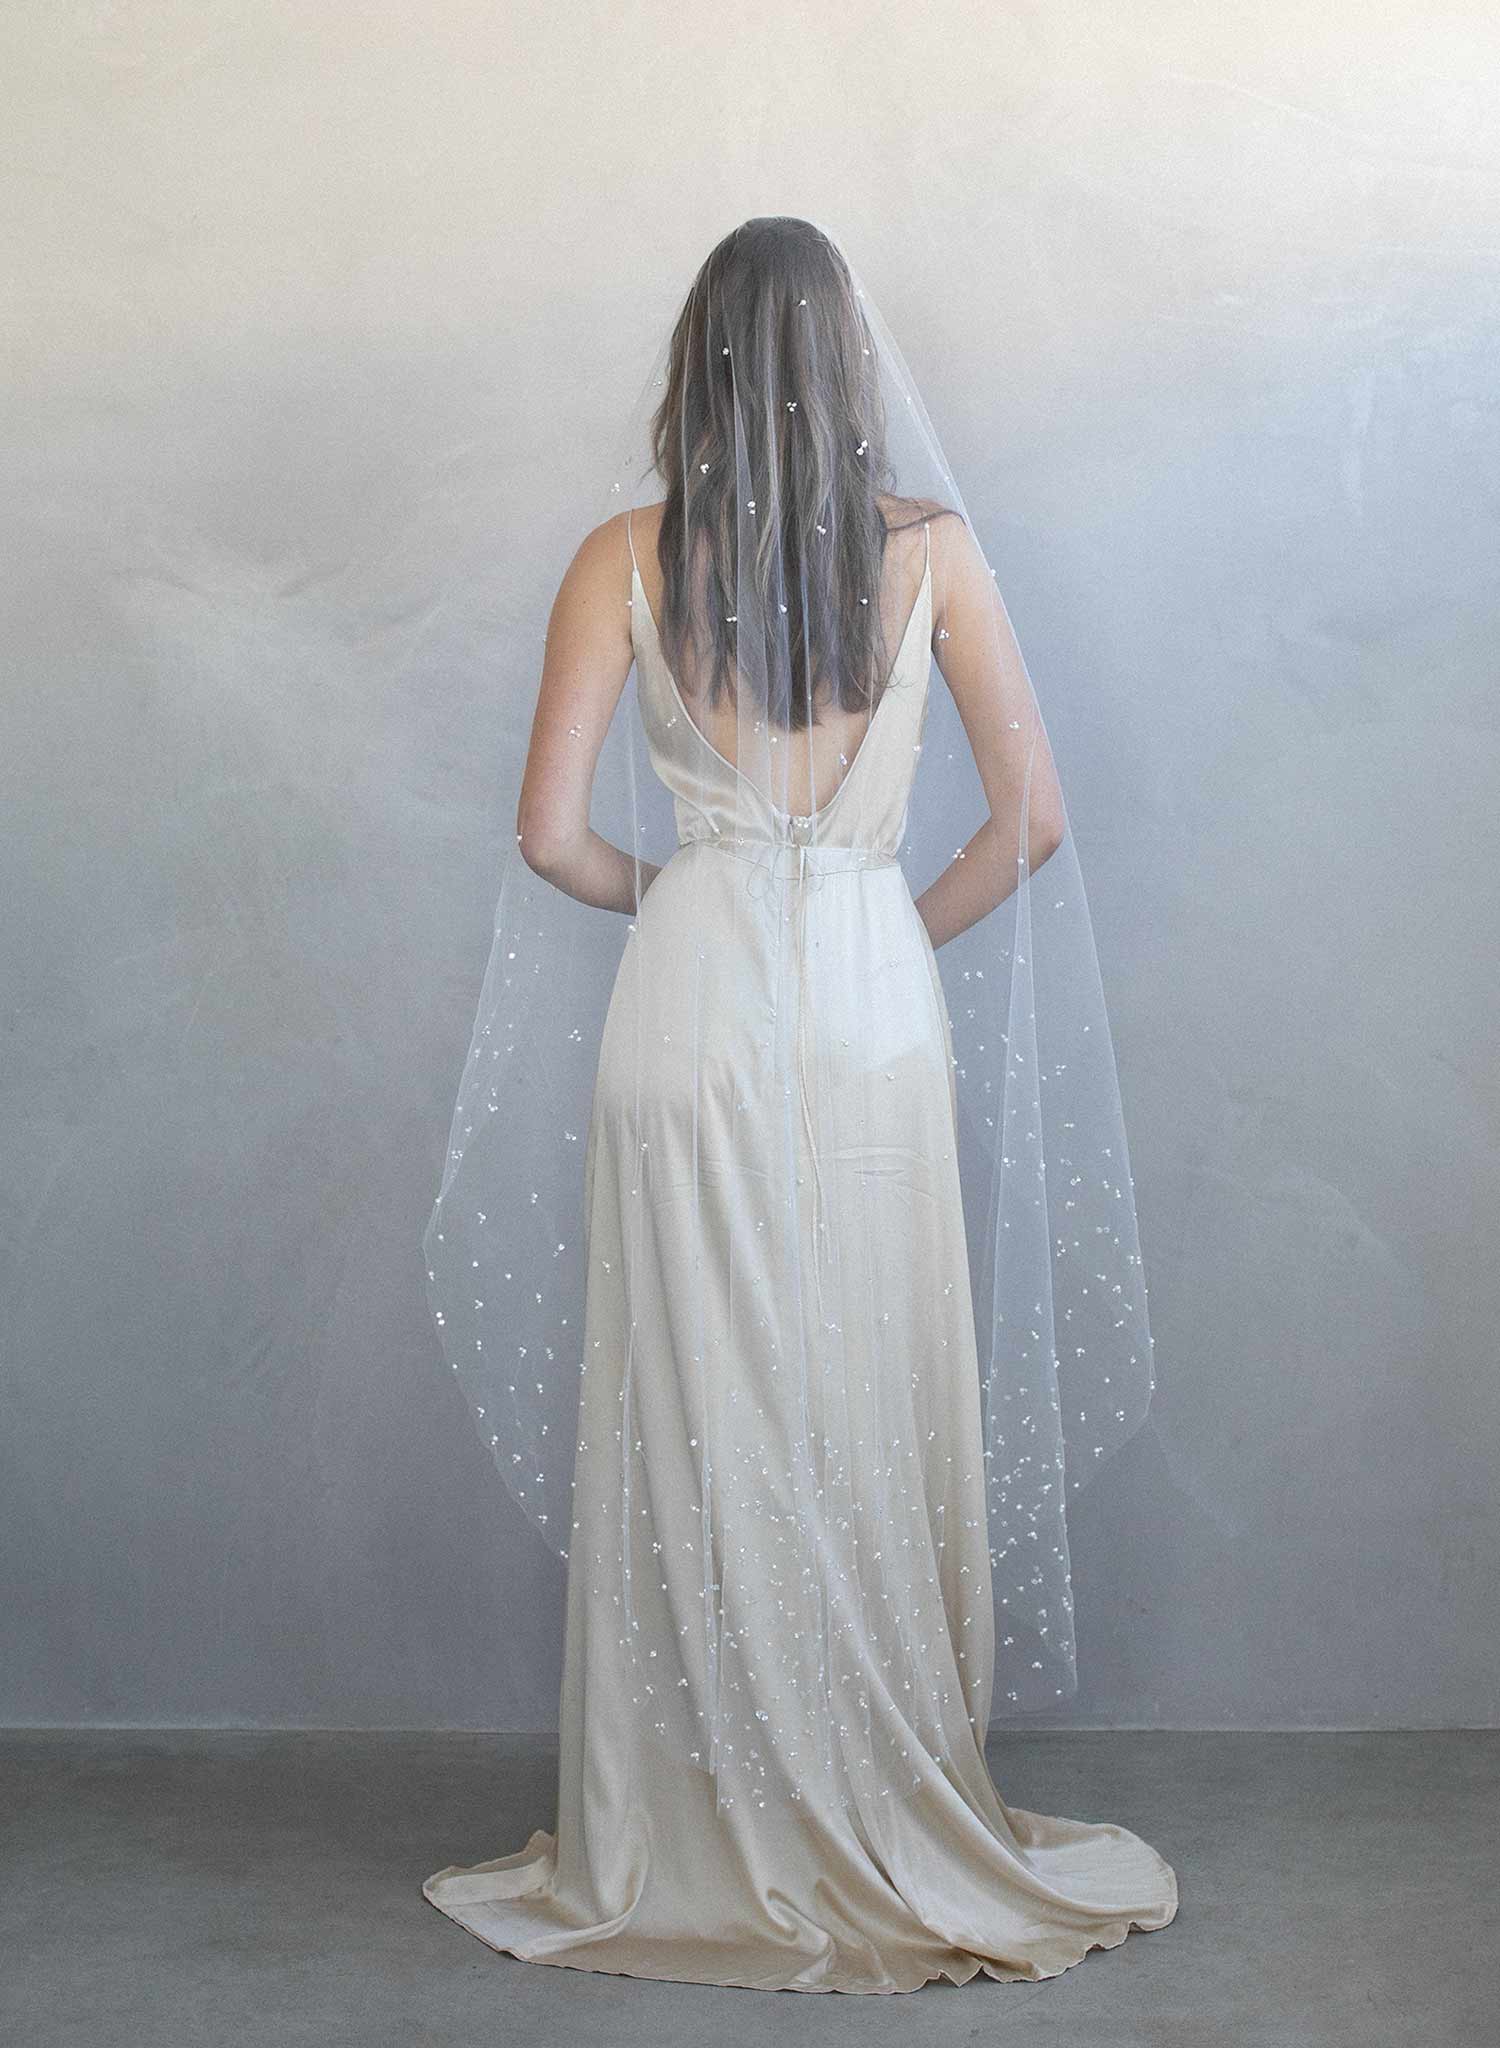 Twigs & Honey Cathedral Train Veil, Bridal Floral Veil - Floral Embroidered Bridal Train Veil, Cathedral - Style #2367